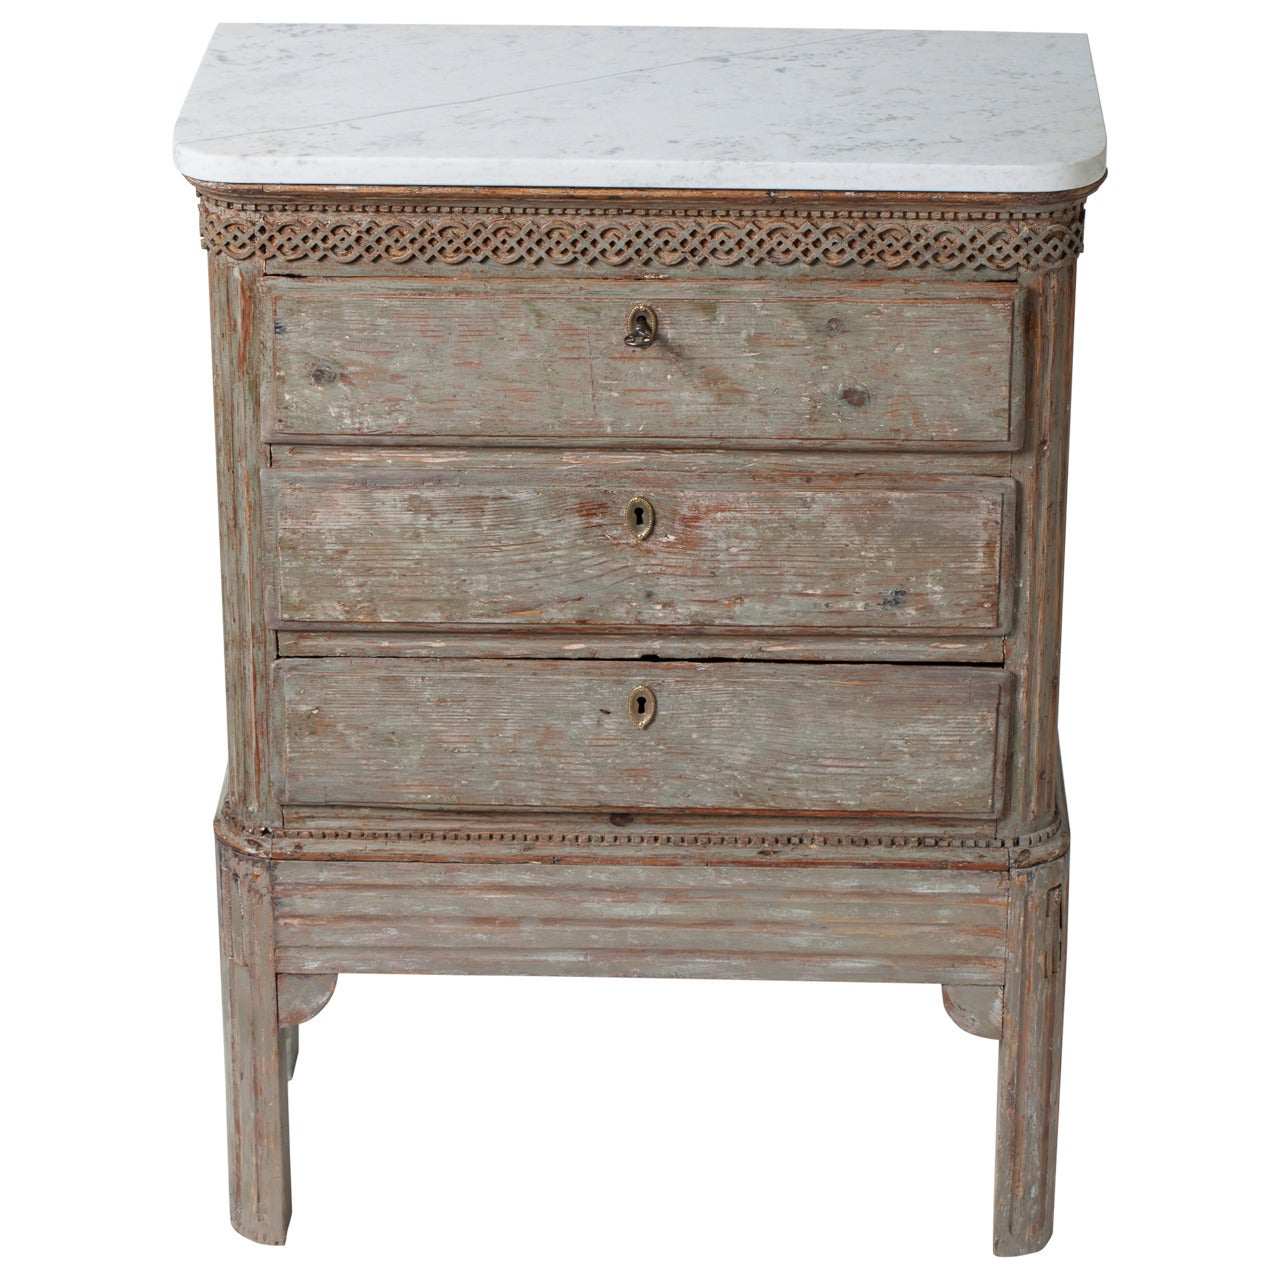 A Swedish Gustavian Period Small chest of Drawers circa 1780.